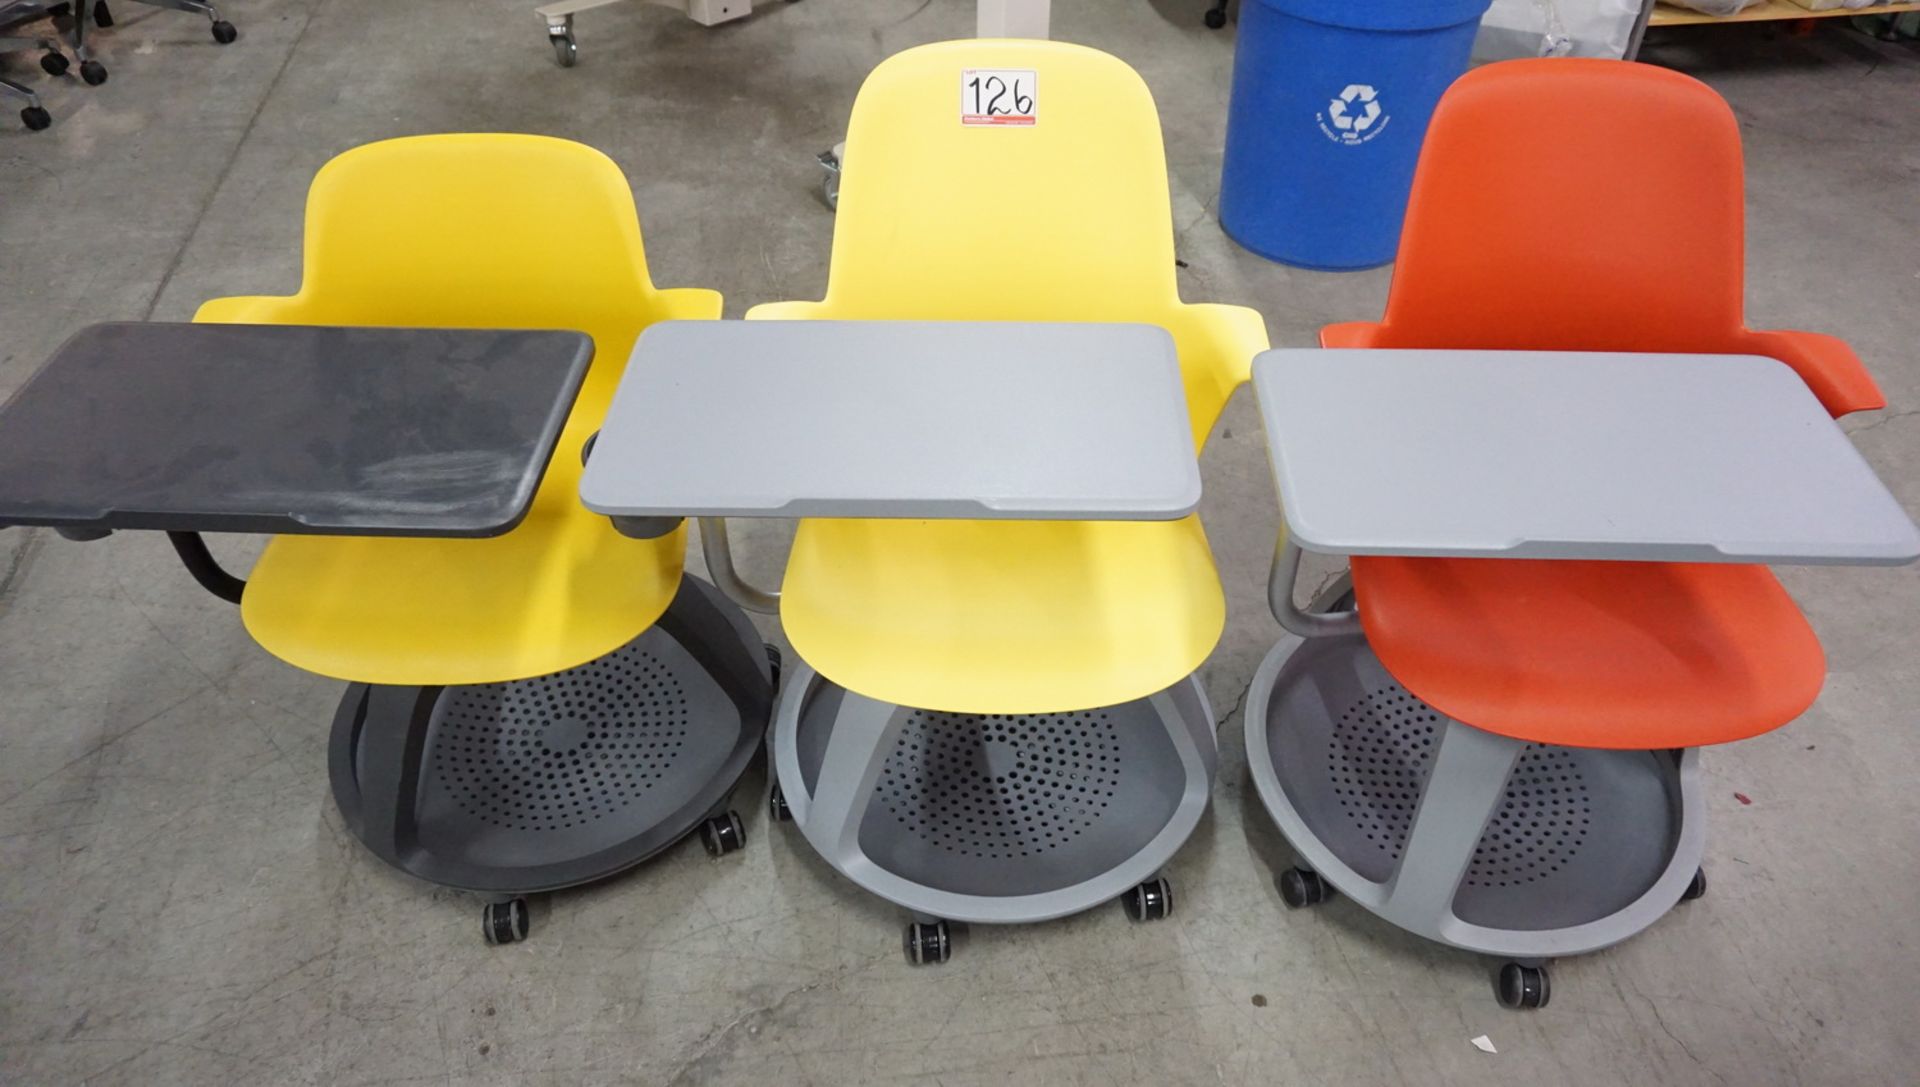 UNITS - STEELCASE NODE YELLOW & ORANGE MOBILE CLASSROOM CHAIR W/ WORKSURFACE